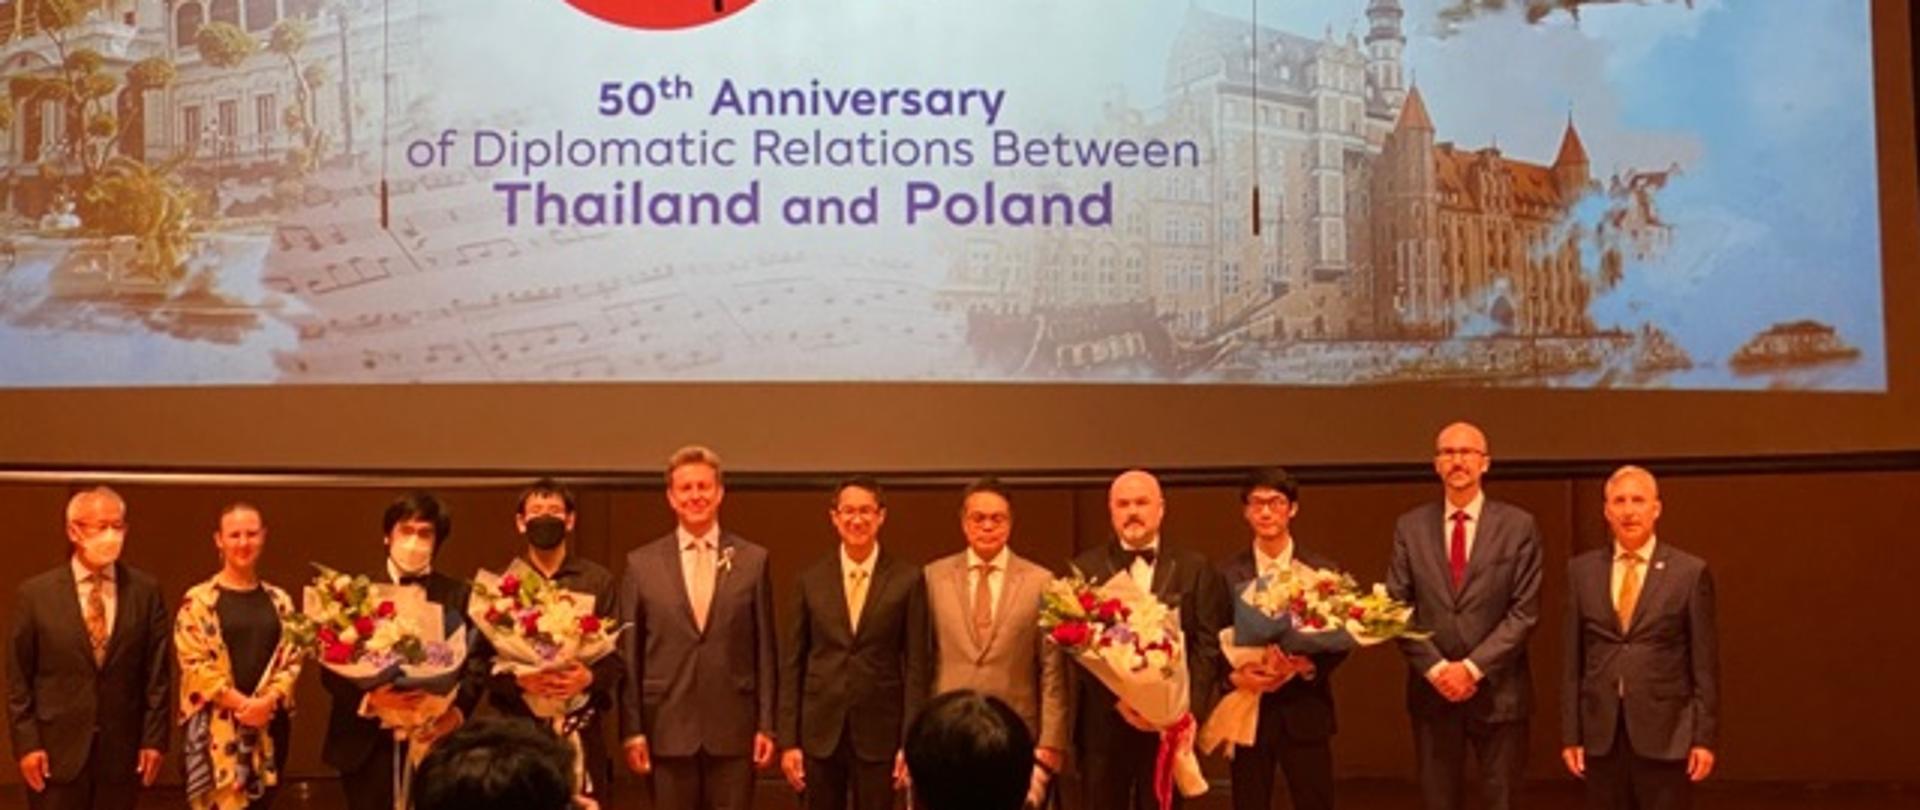 50th anniversary PL - TH diplomatic relations